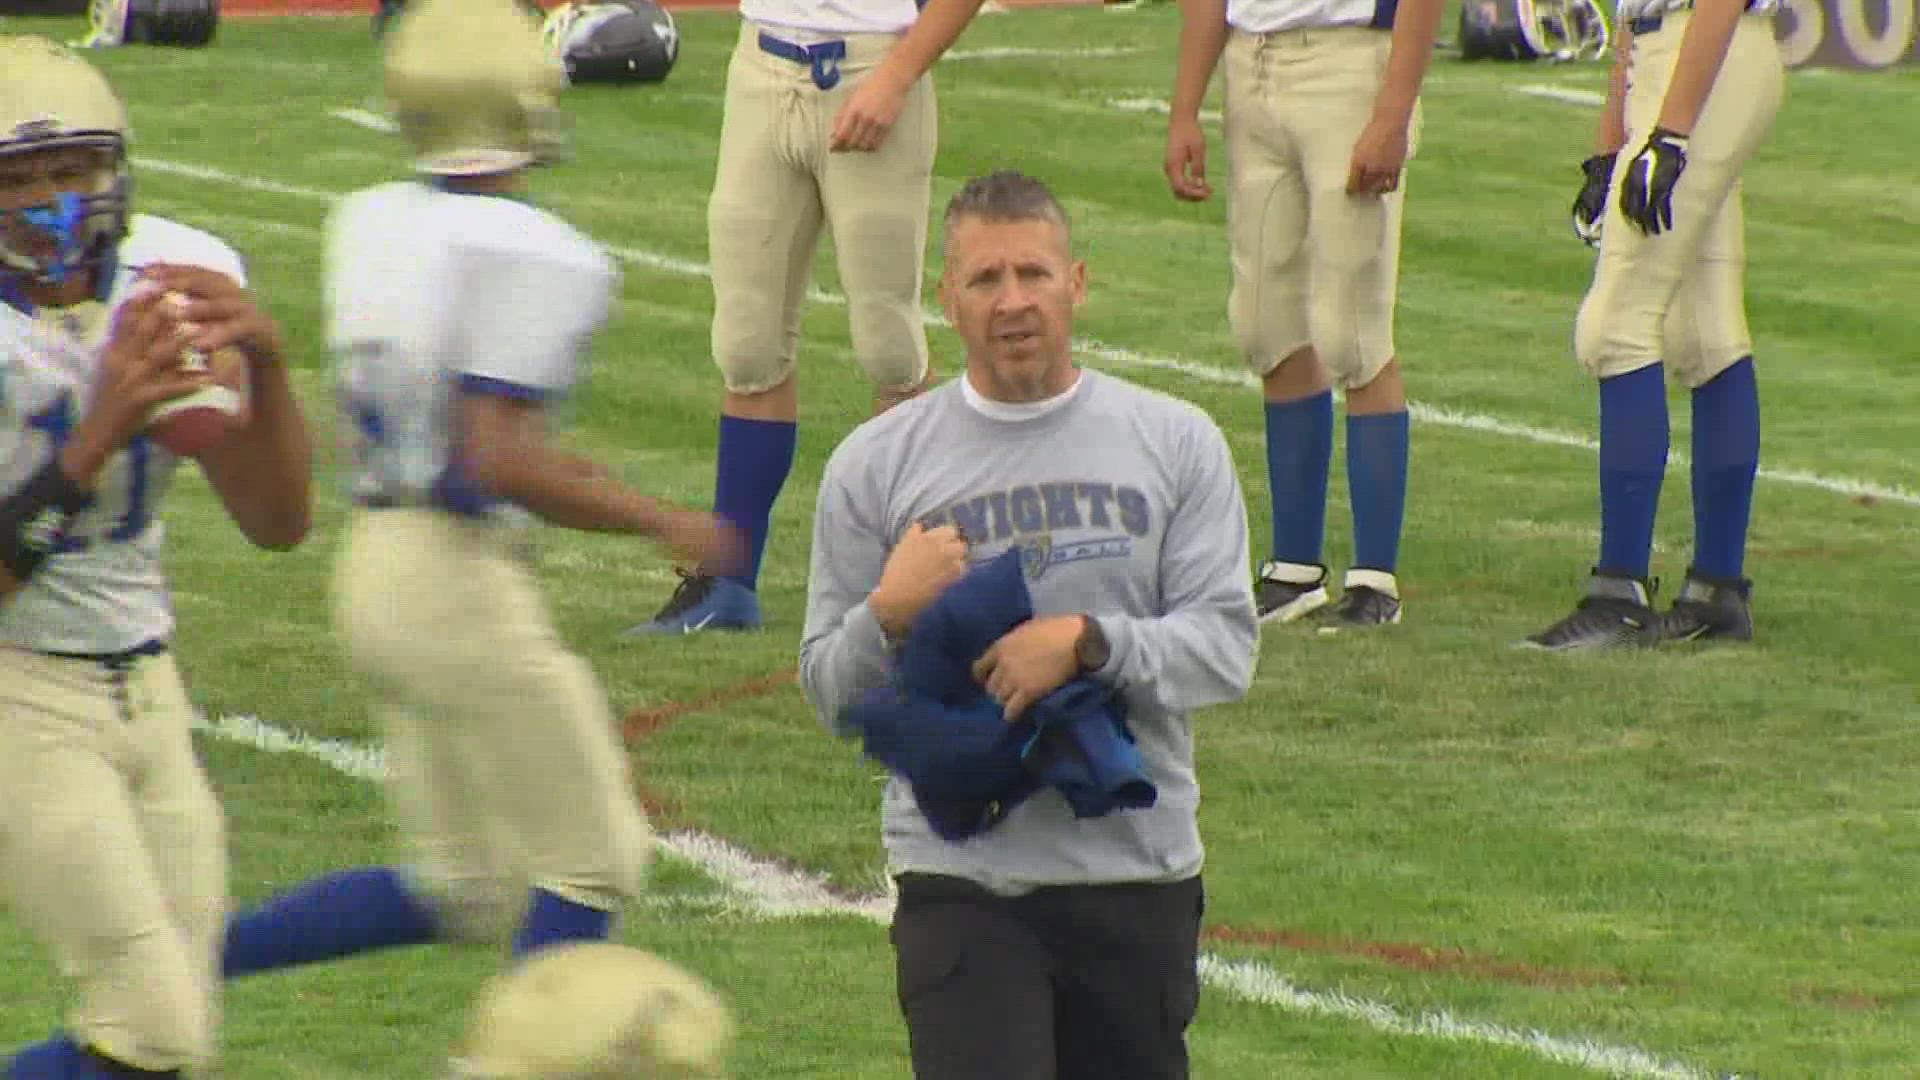 Joseph Kennedy lost his job as an assistant coach at Bremerton in 2015 over his on-field prayers with players.